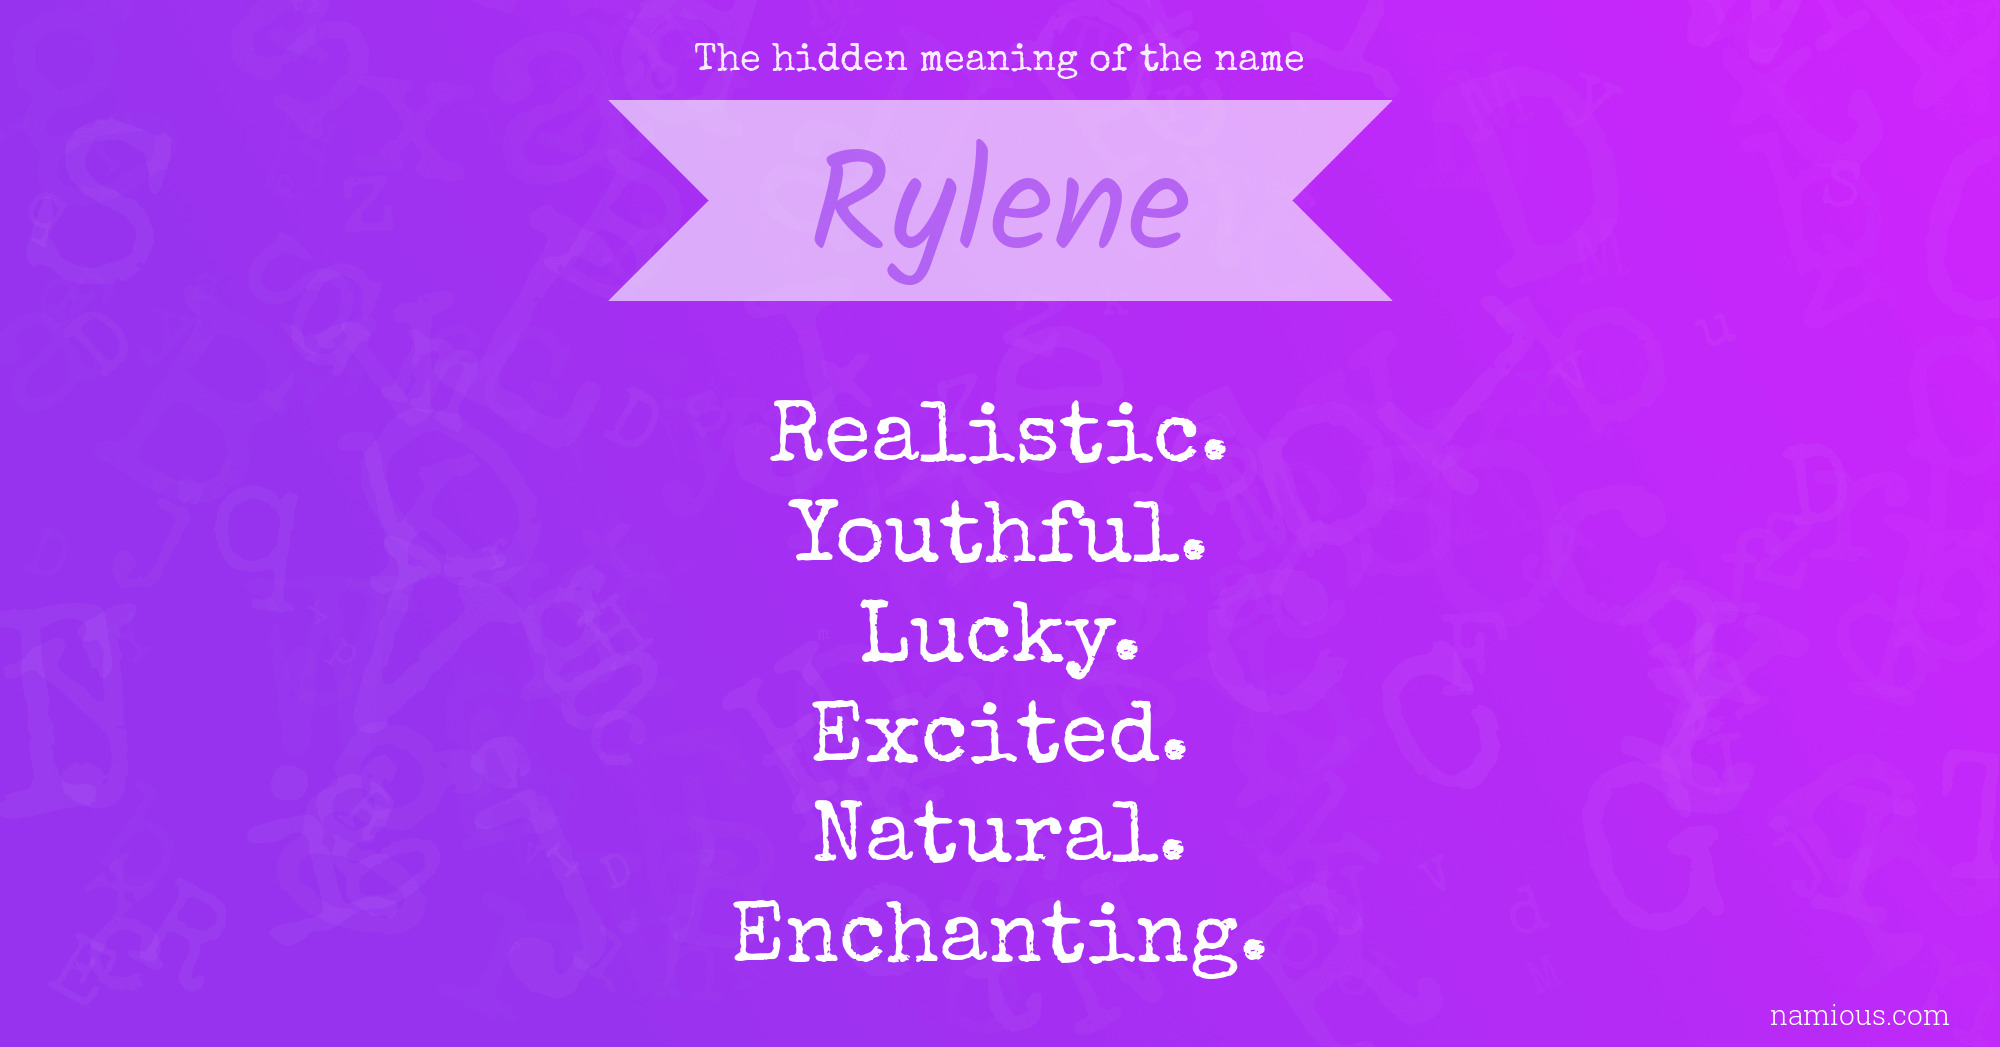 The hidden meaning of the name Rylene